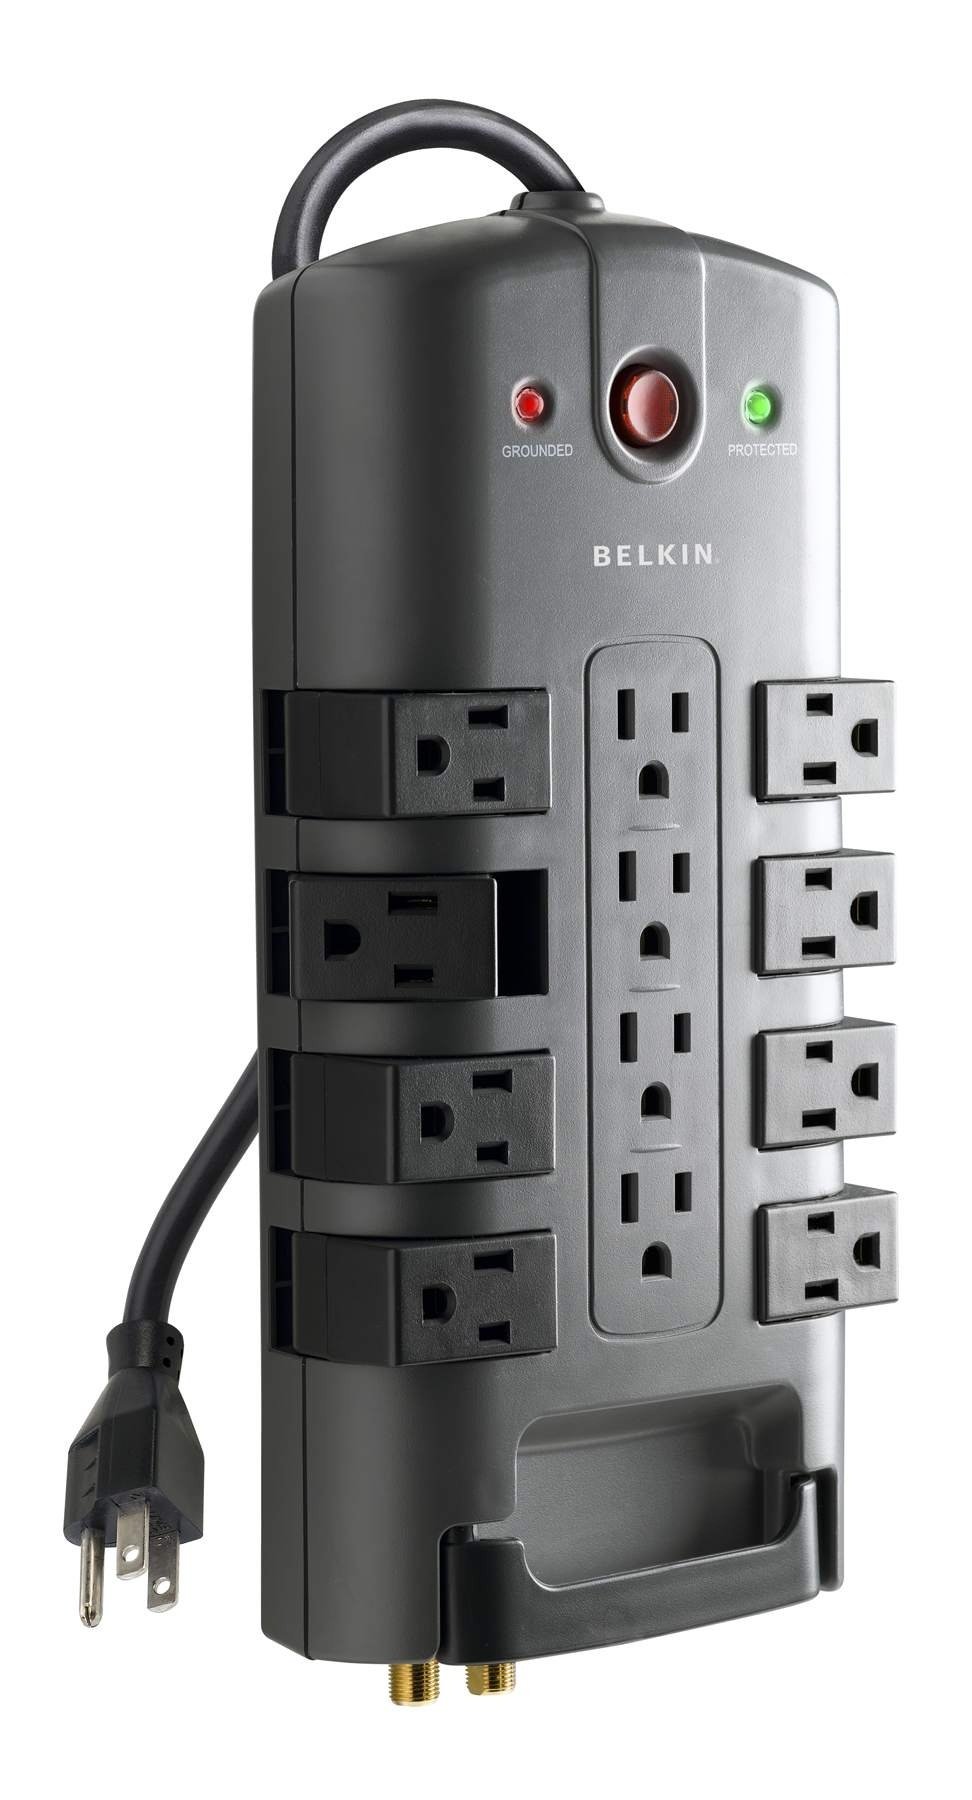 Belkin Surge Protector Power Strip w/ 8 Rotating & 4 Standard Outlets - 8ft Sturdy Extension Cord w/ Flat Pivot Plug for Home, Office, Travel, Desktop & Charging Brick - 4320 Joules of Protection